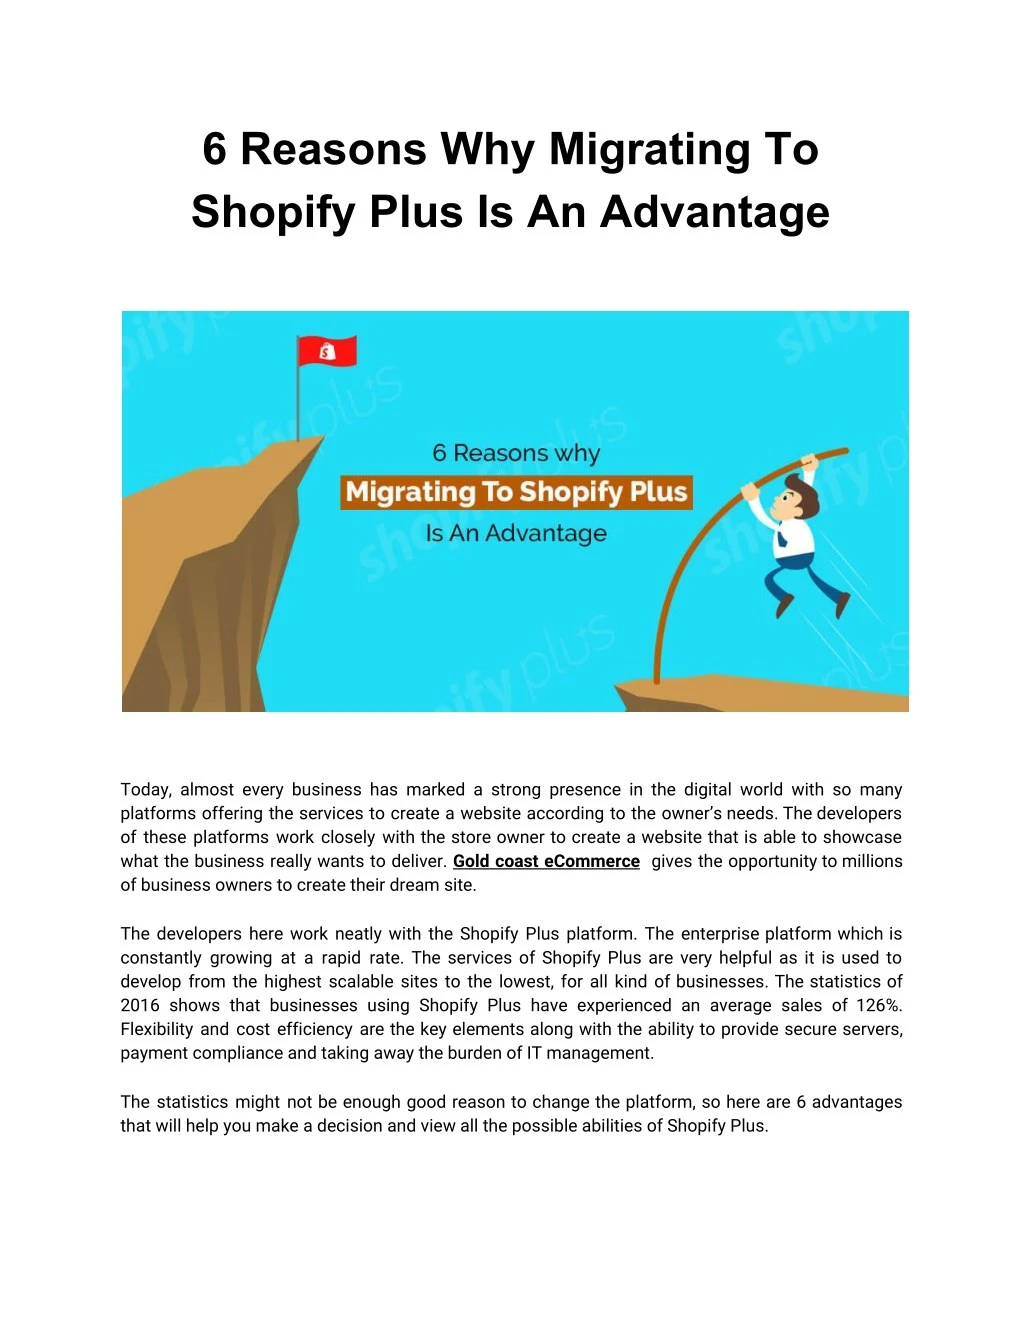 6 reasons why migrating to shopify plus